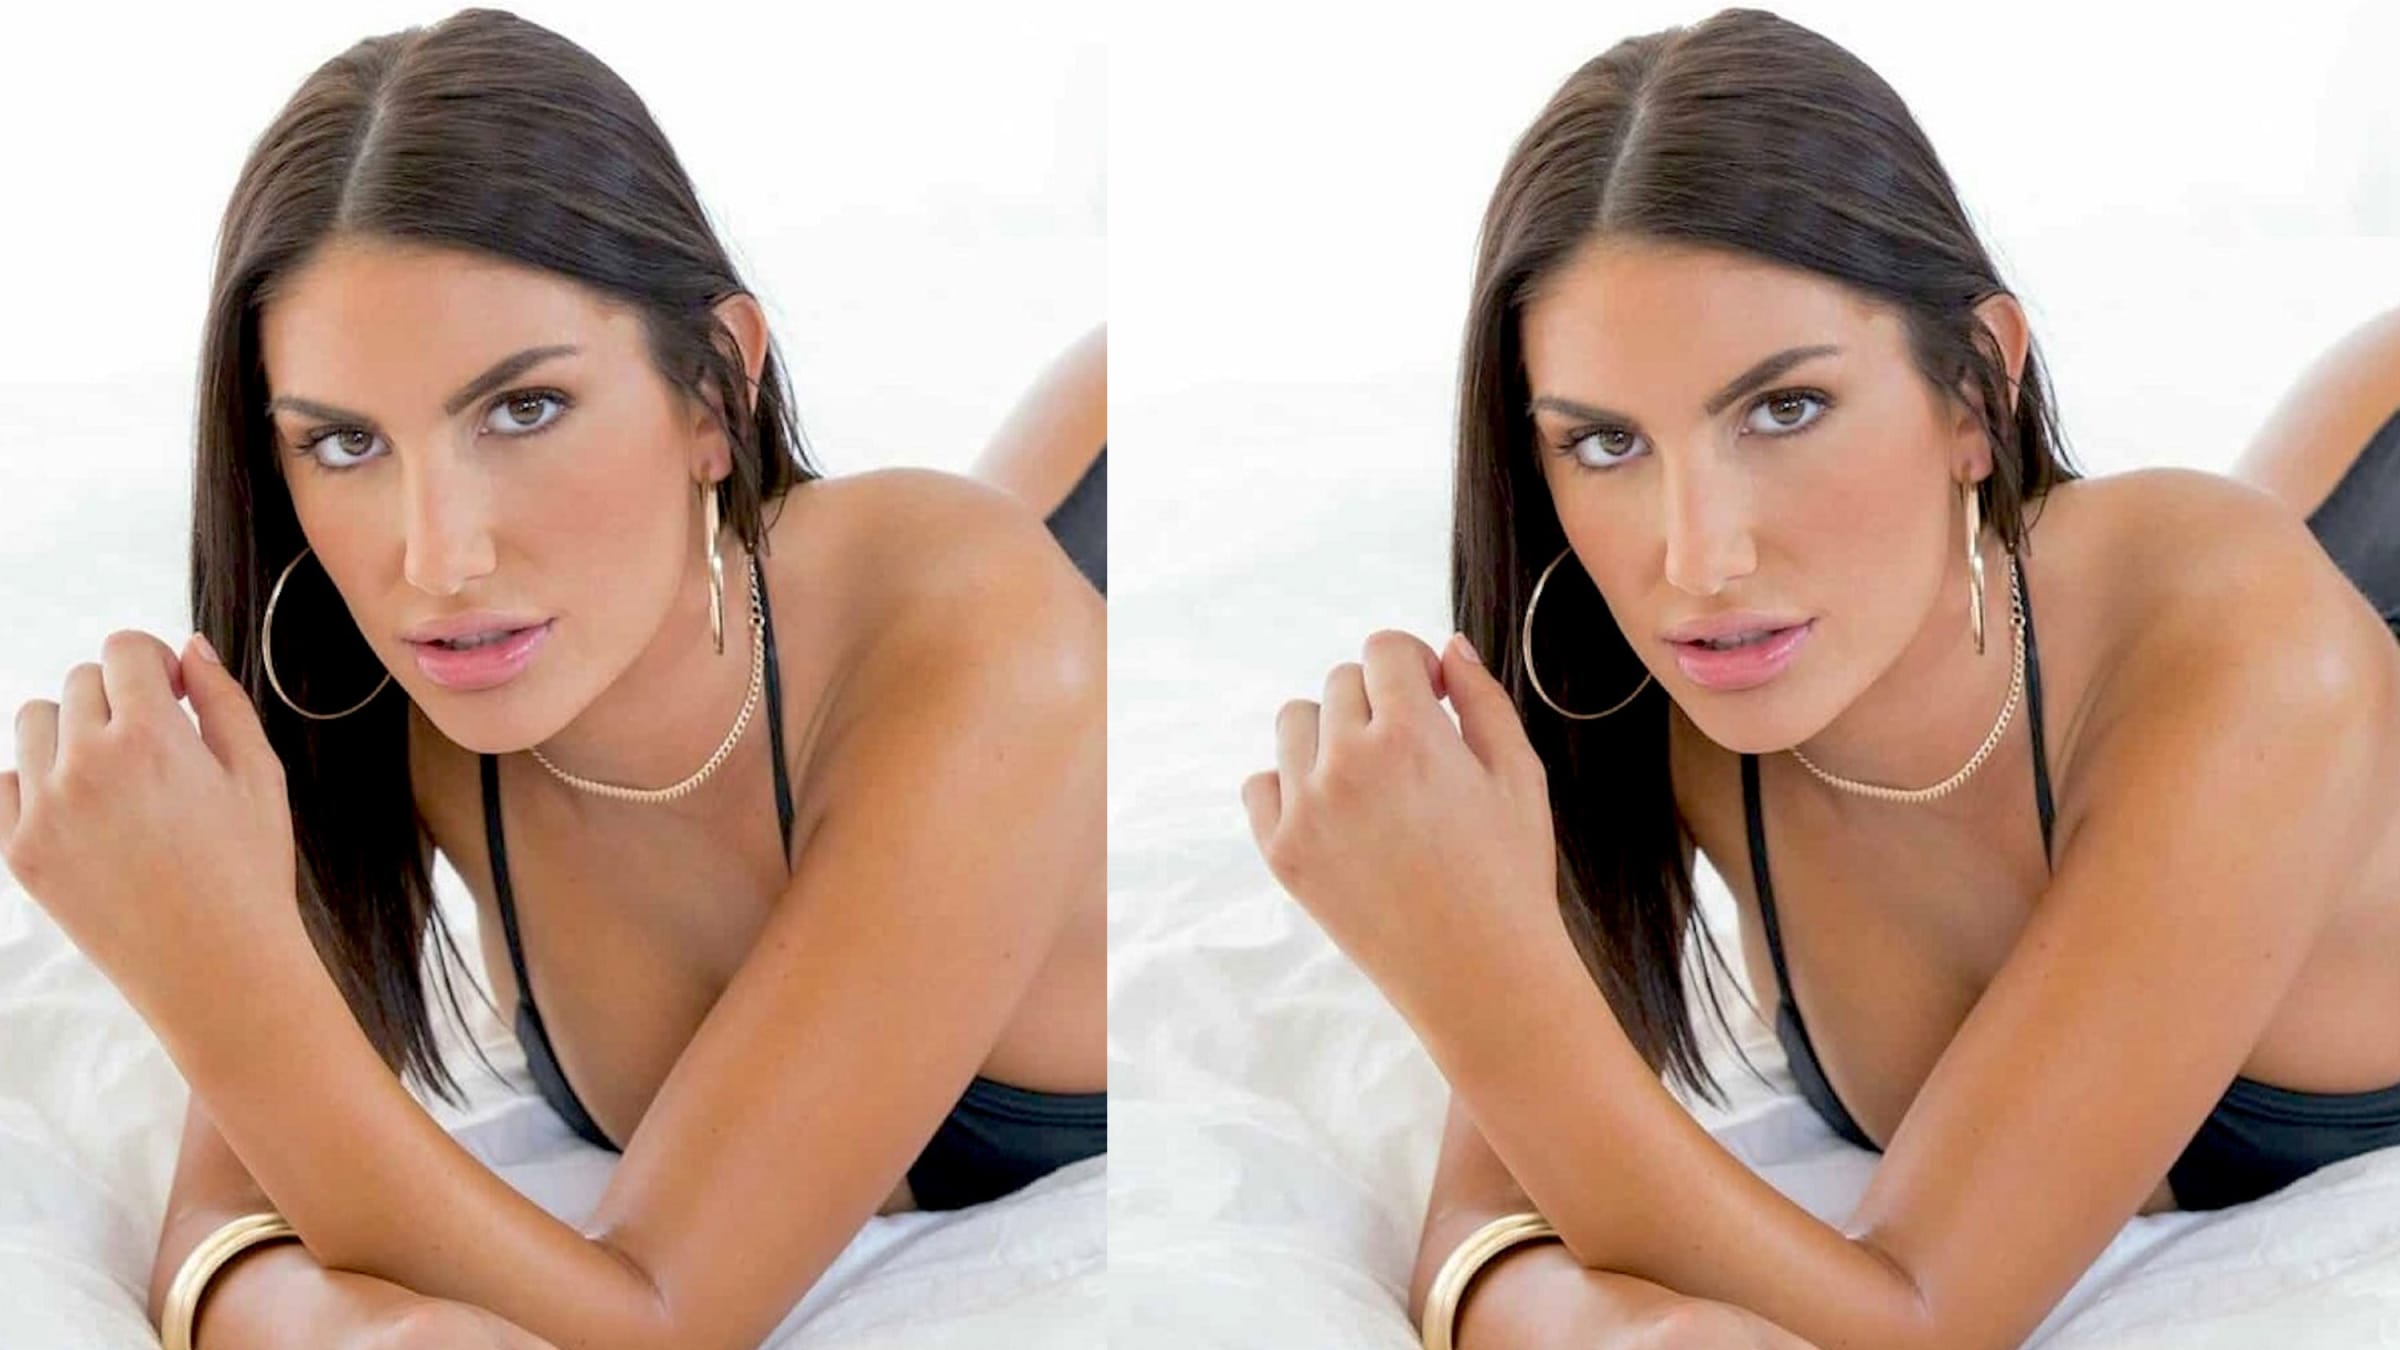 Mother of Cyberbullied Porn Star August Ames Opens Up About Her Last Days